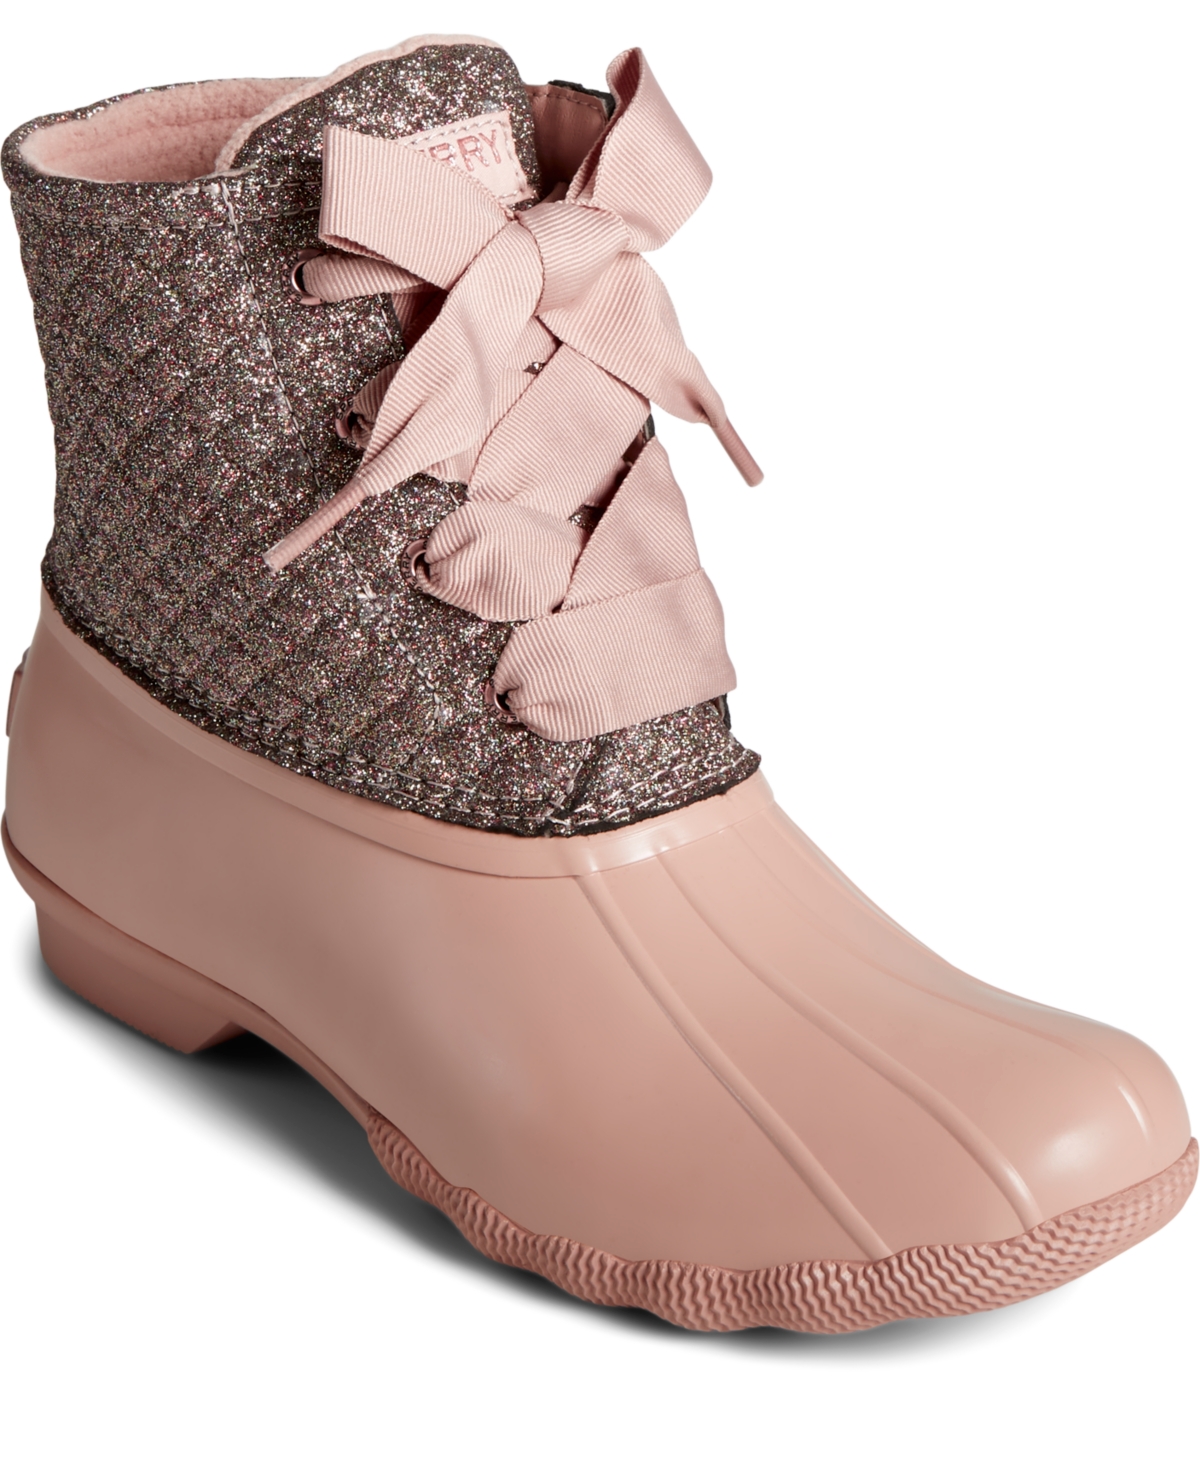 Sperry Saltwater Shimmer Duck Narrow Calf Boots In Rose